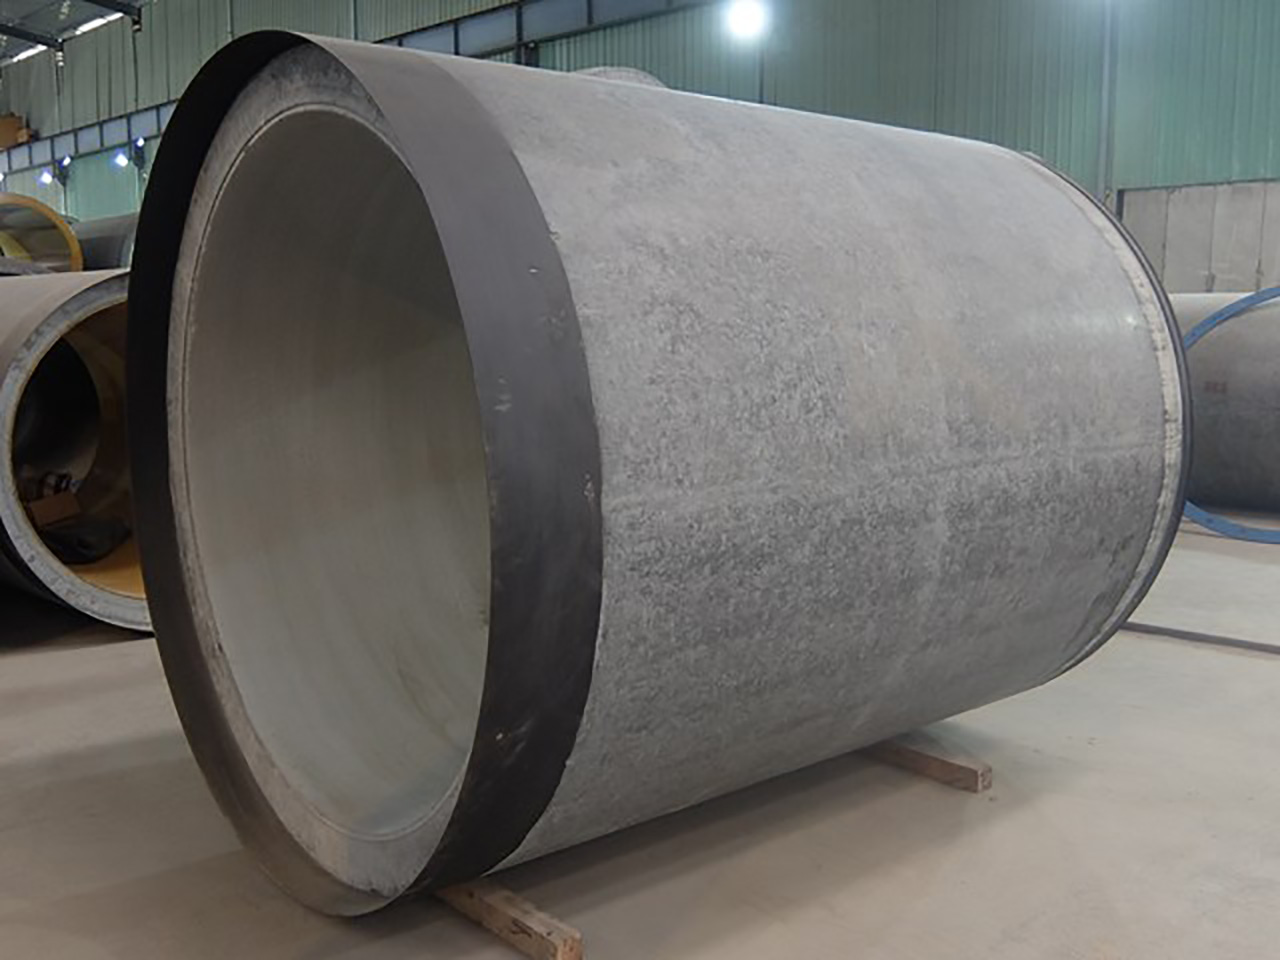 Centrifugal reinforced concrete pipes (jacking pipes)